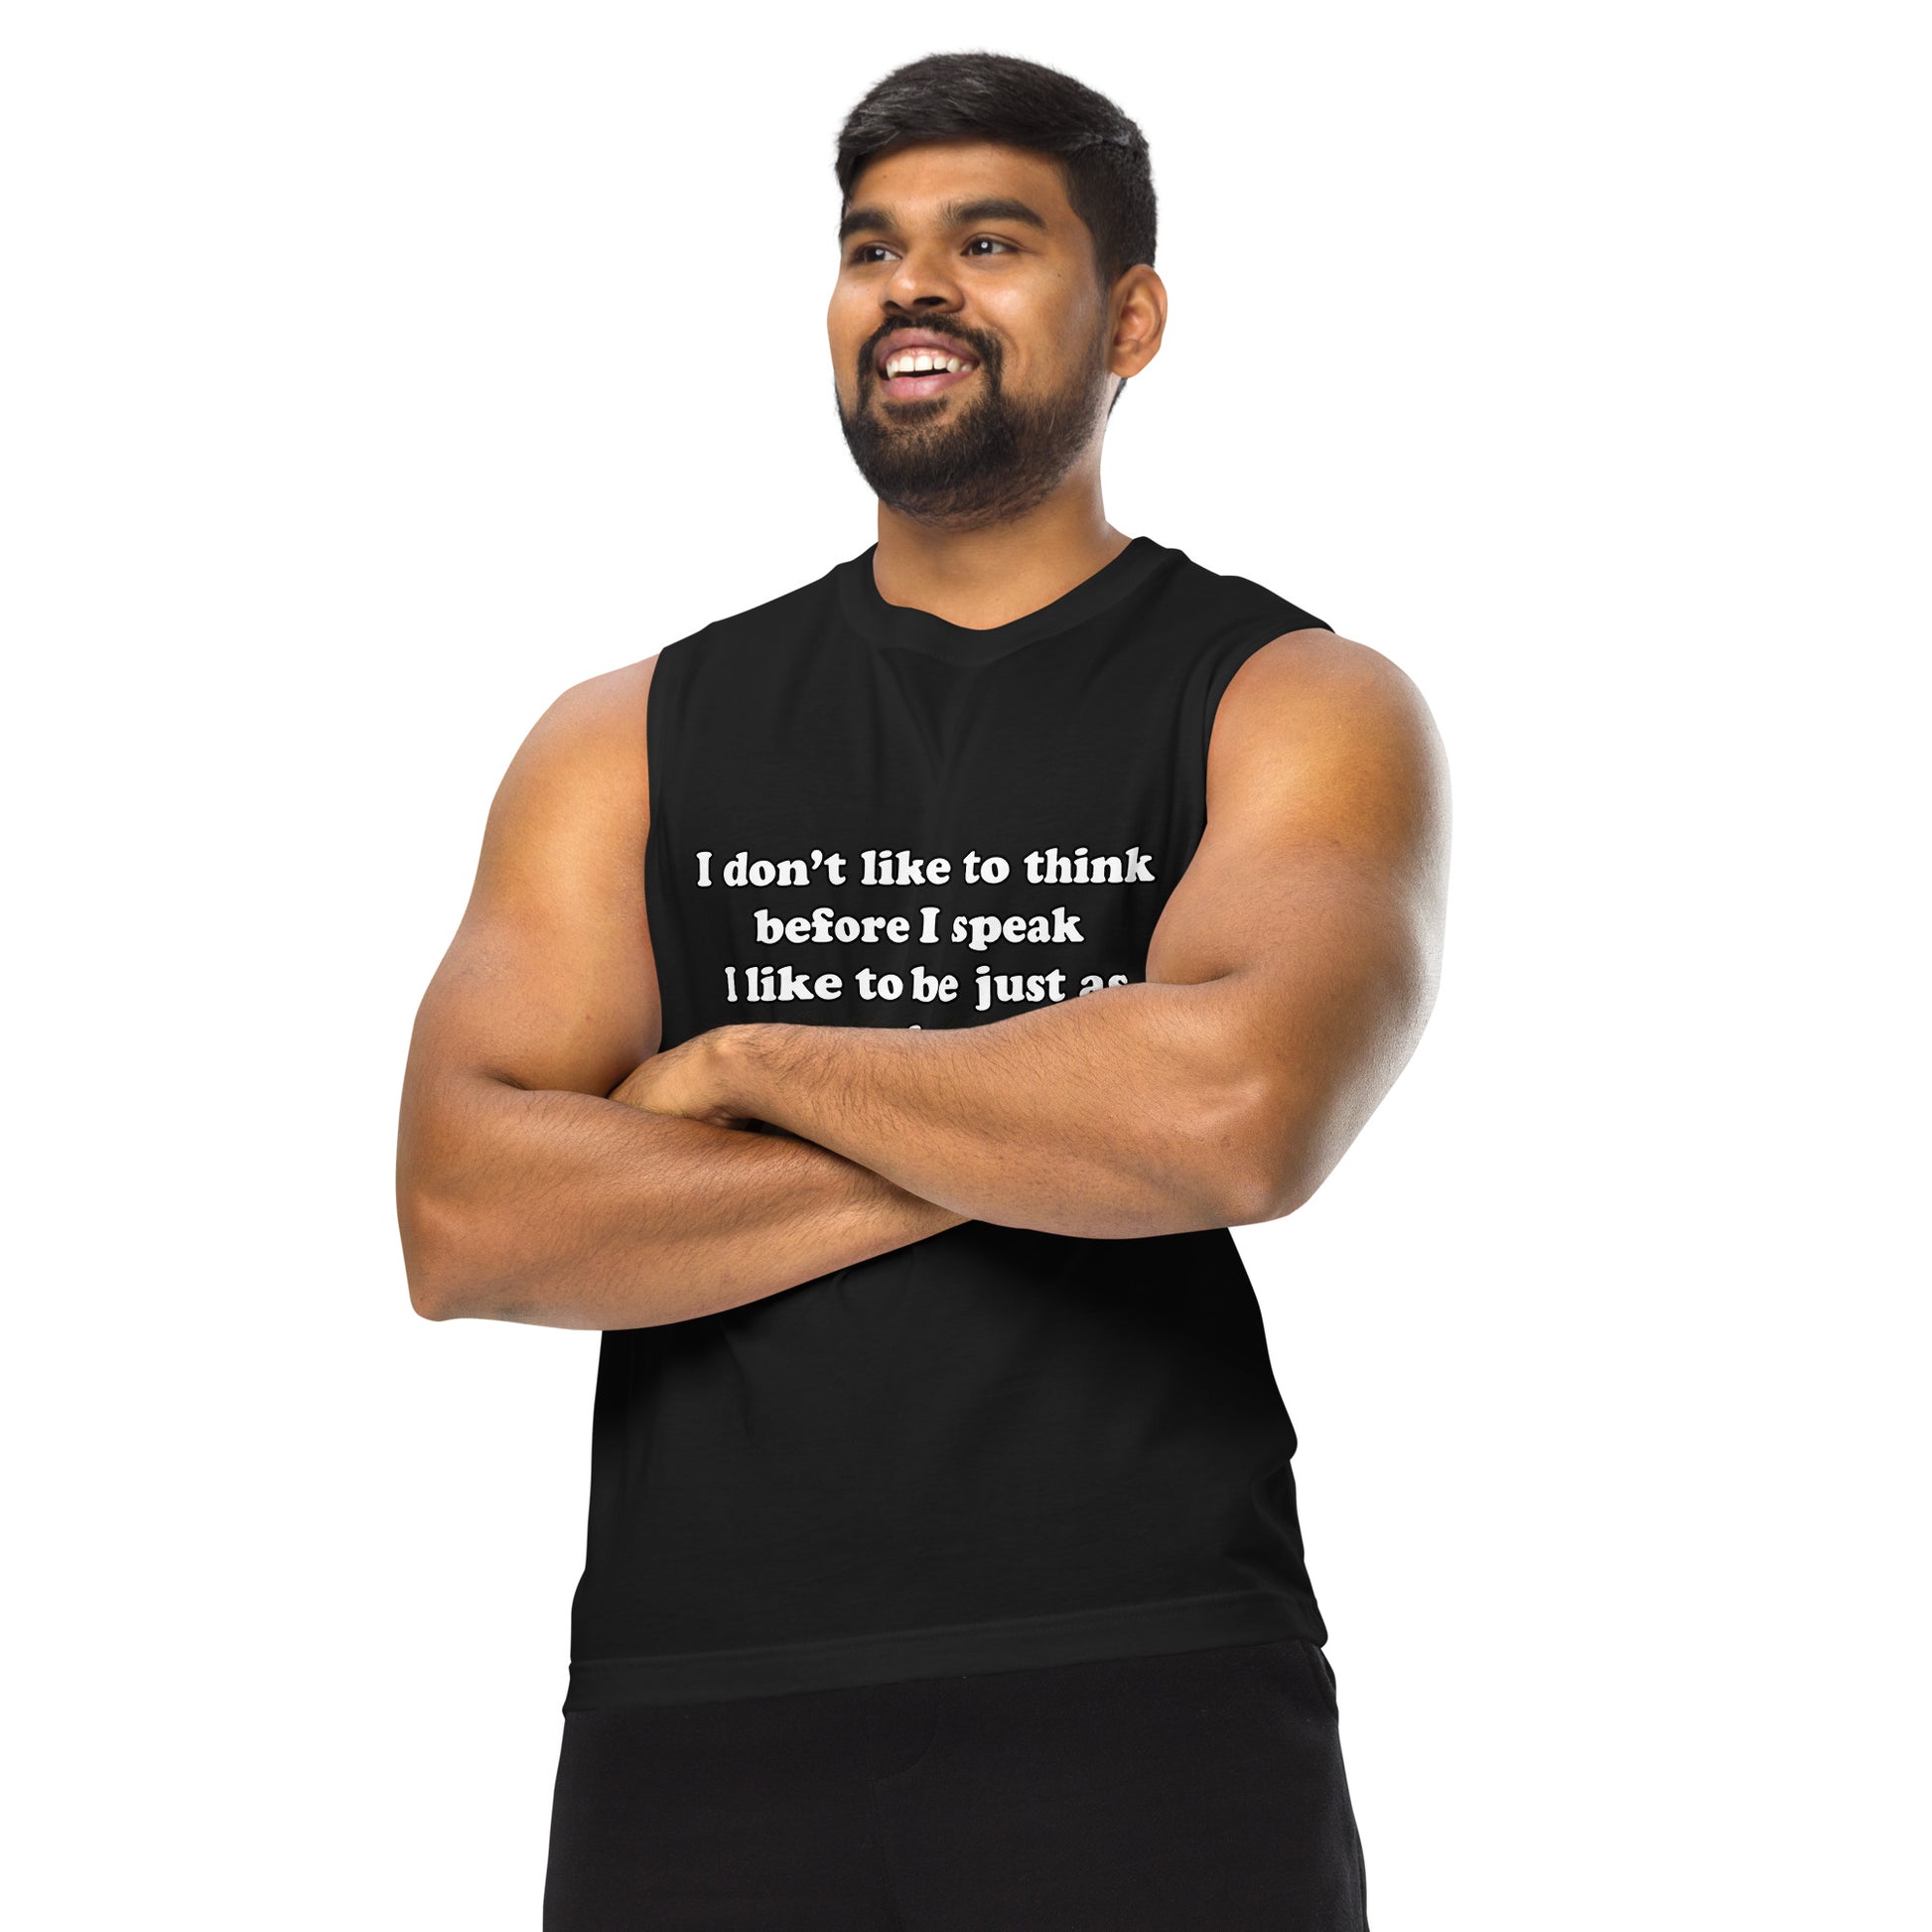 Man with black muscle tank top with text “I don't think before I speak Just as serprised as everyone about what comes out of my mouth"